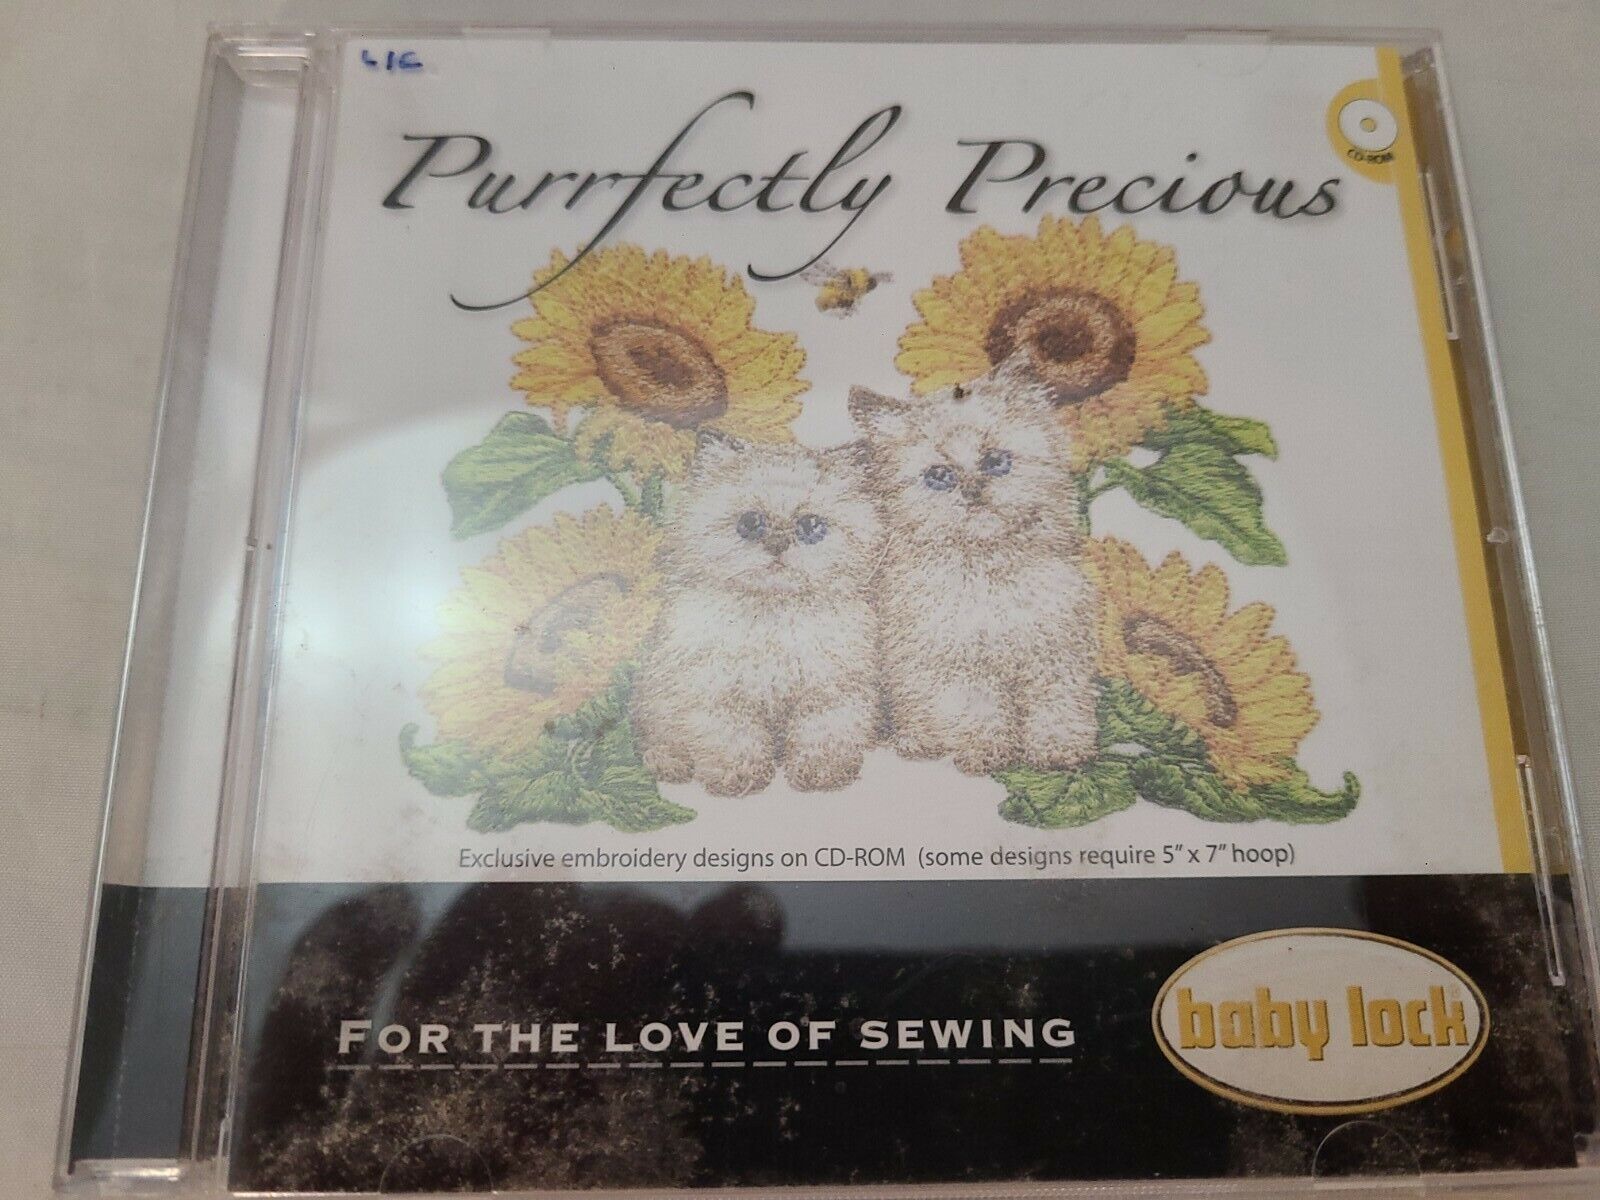 For The Love Of Sewing - Purrfectly Precious - Baby Lock CD Rom Cats & Kittens 